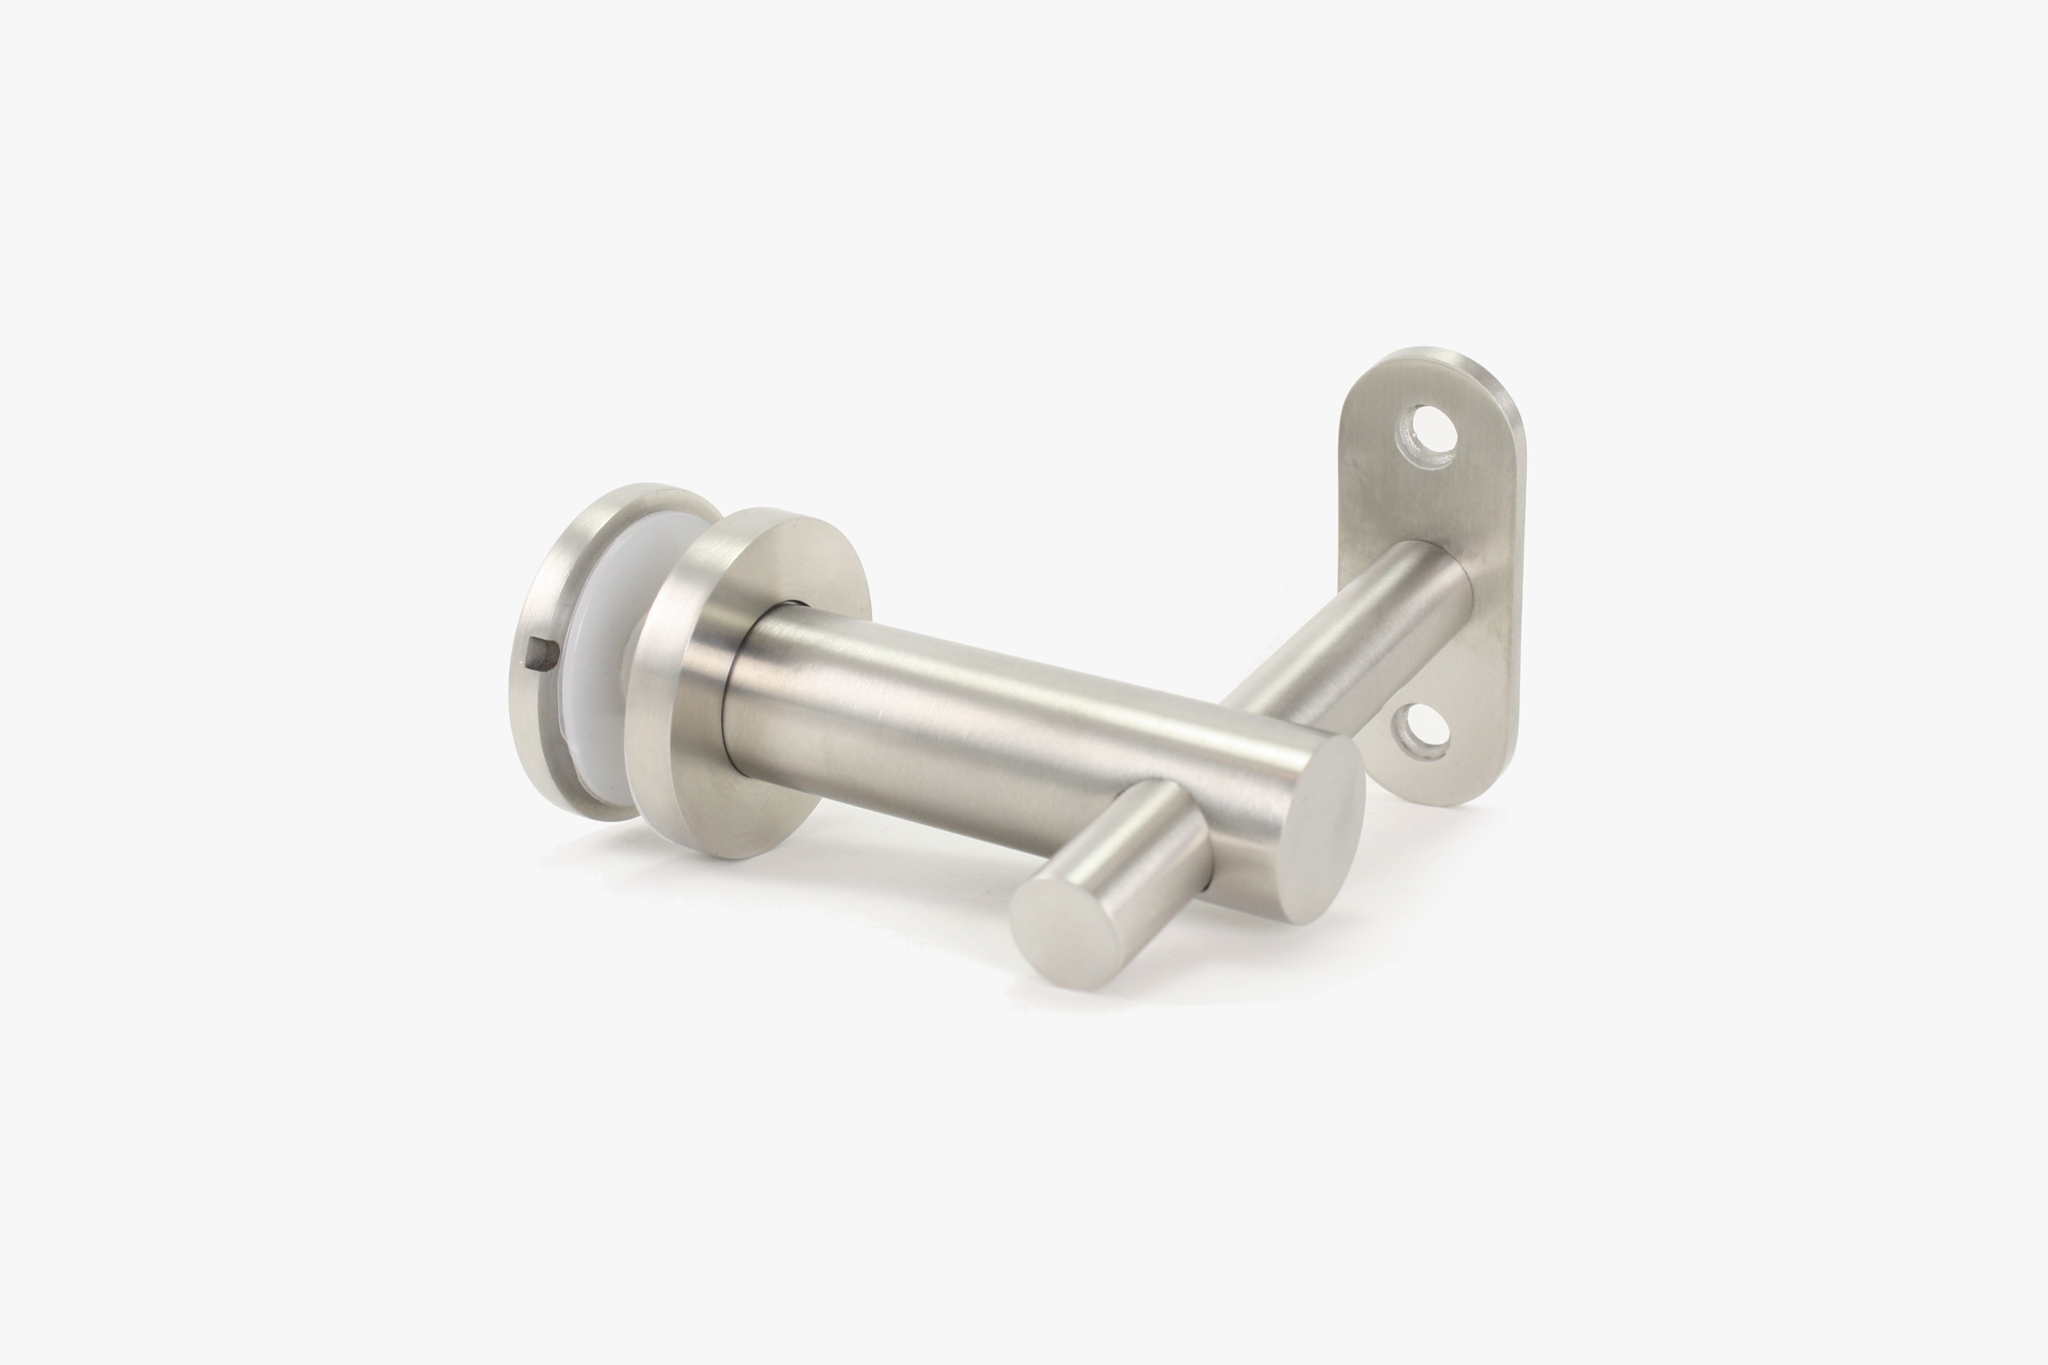 Adjustable glass to square tube handrail bracket - Brushed stainless steel